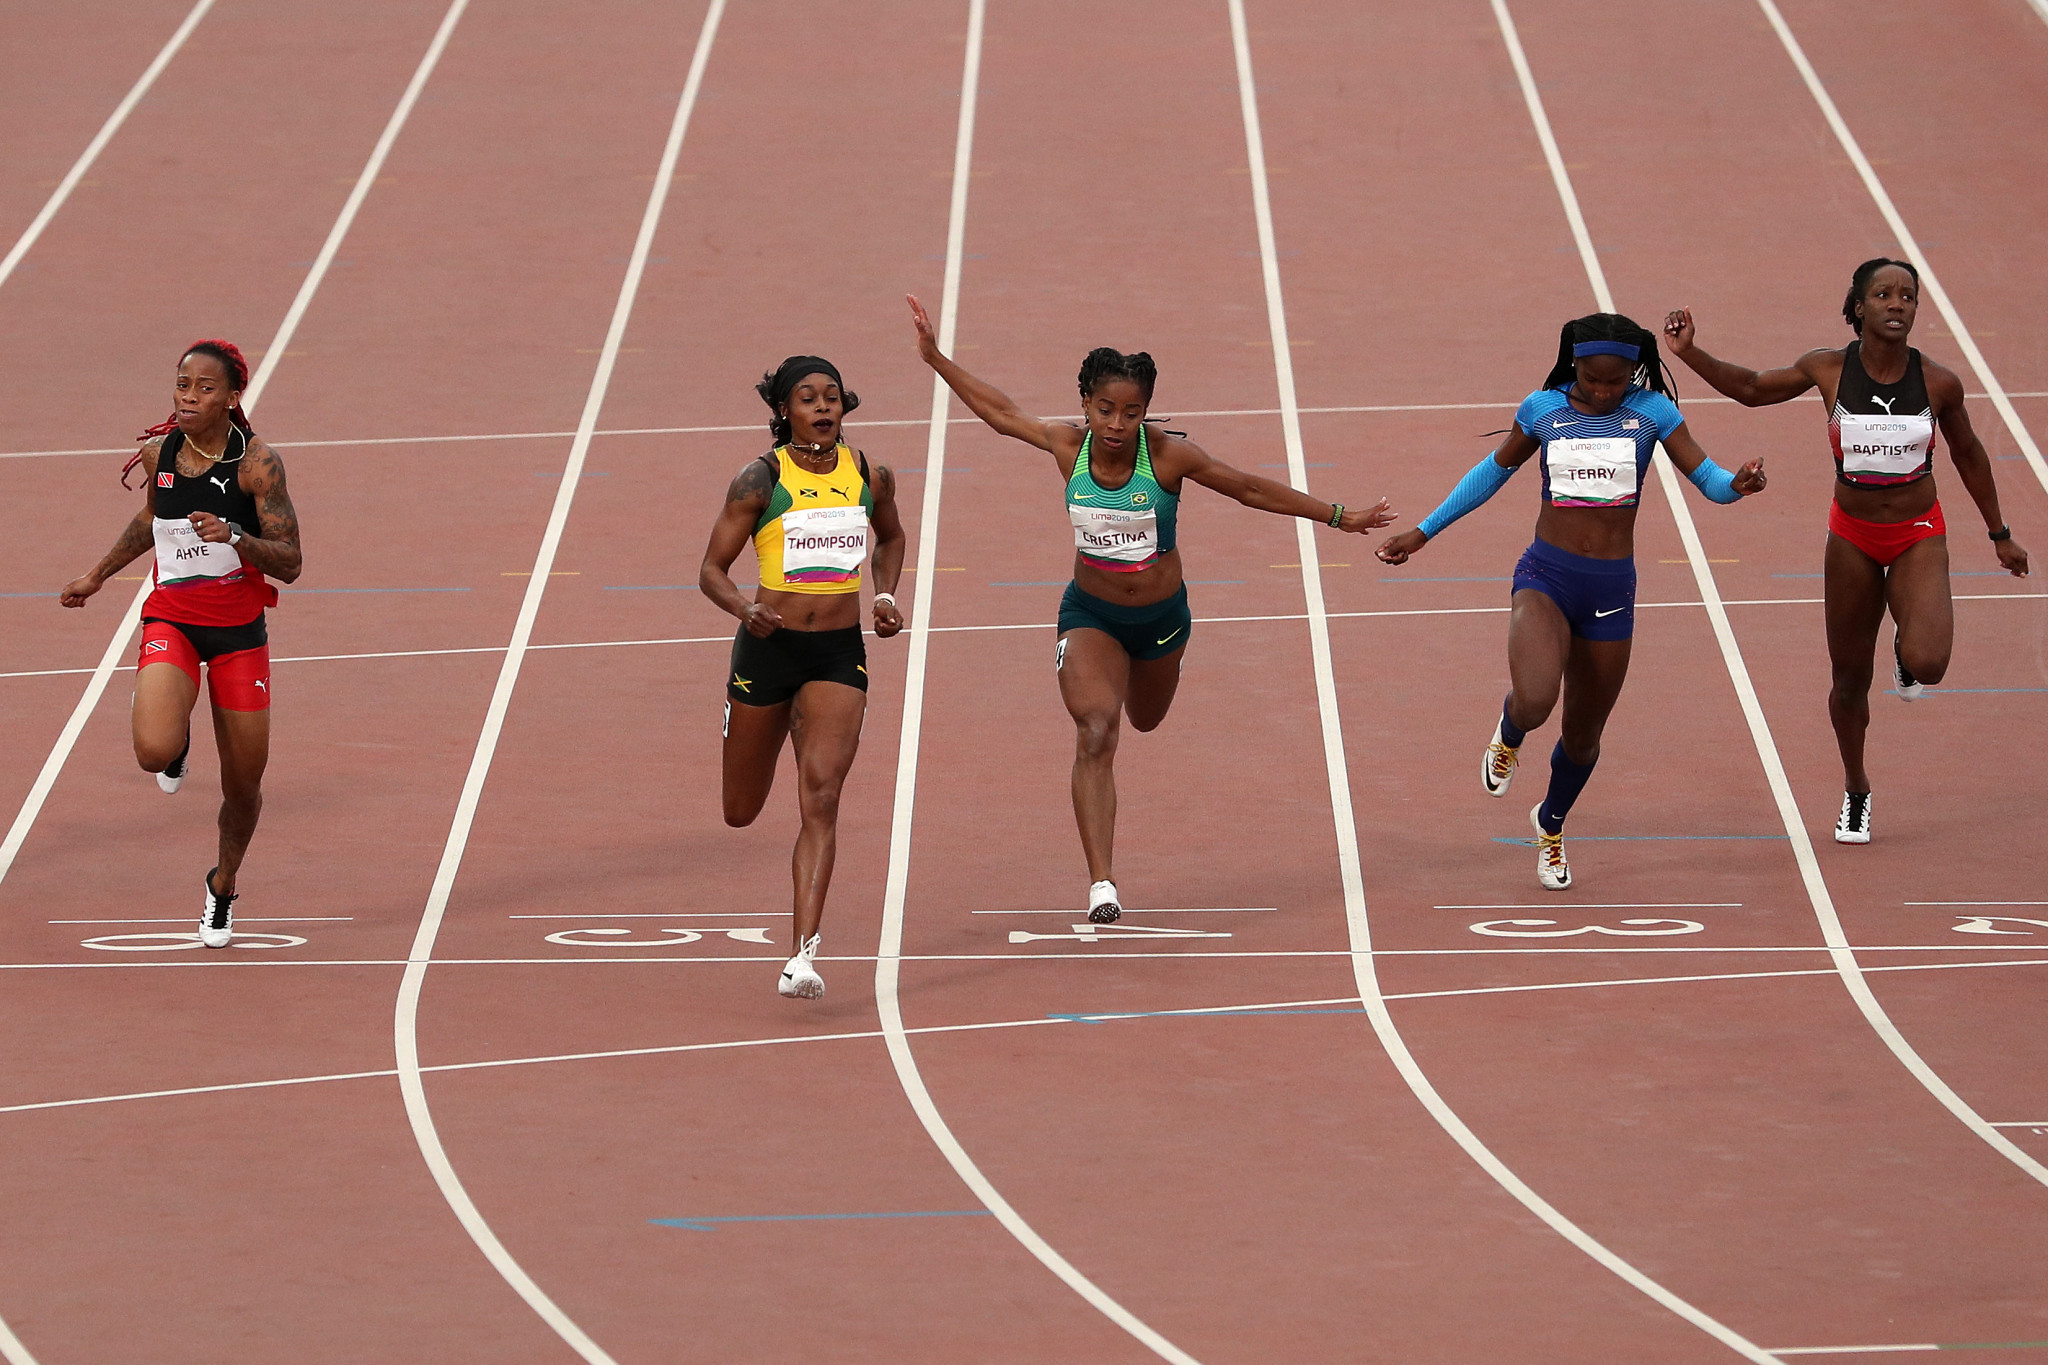 Olympic champion Thompson storms to women's 100m title at Lima 2019